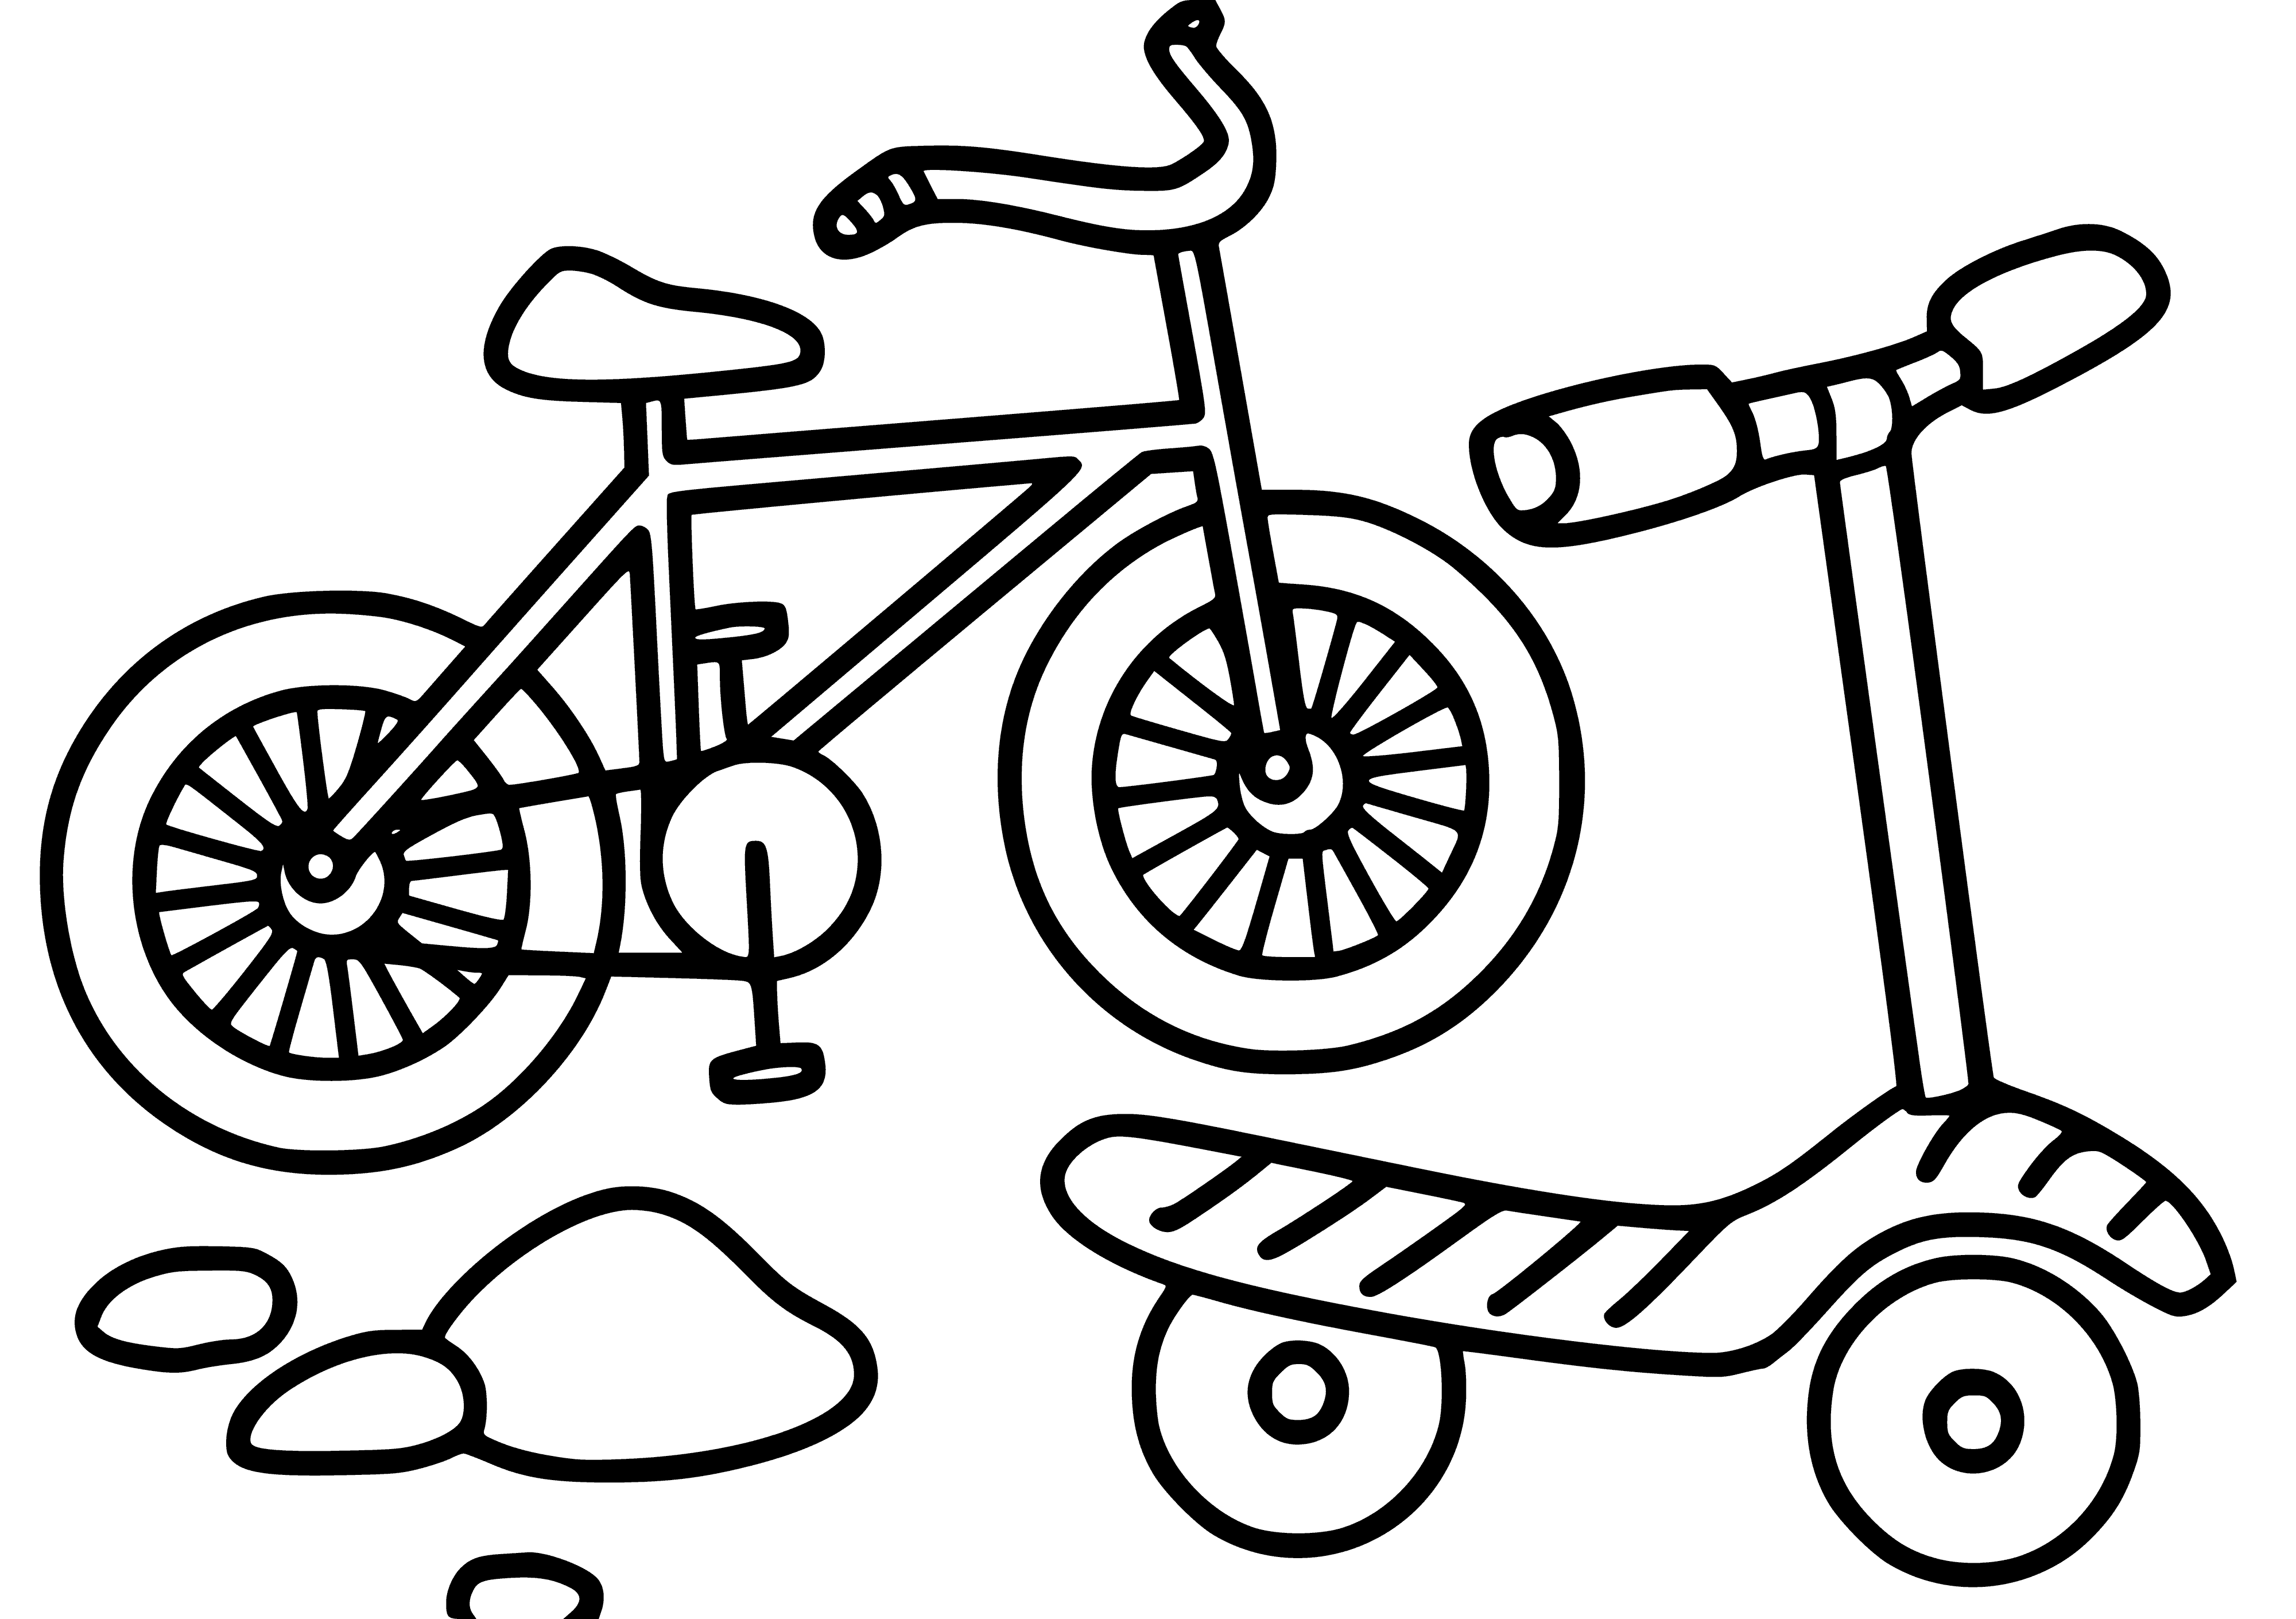 coloring page: Bicycle and scooter have colorful streamers, adding a cheerful touch to their frames. #funride